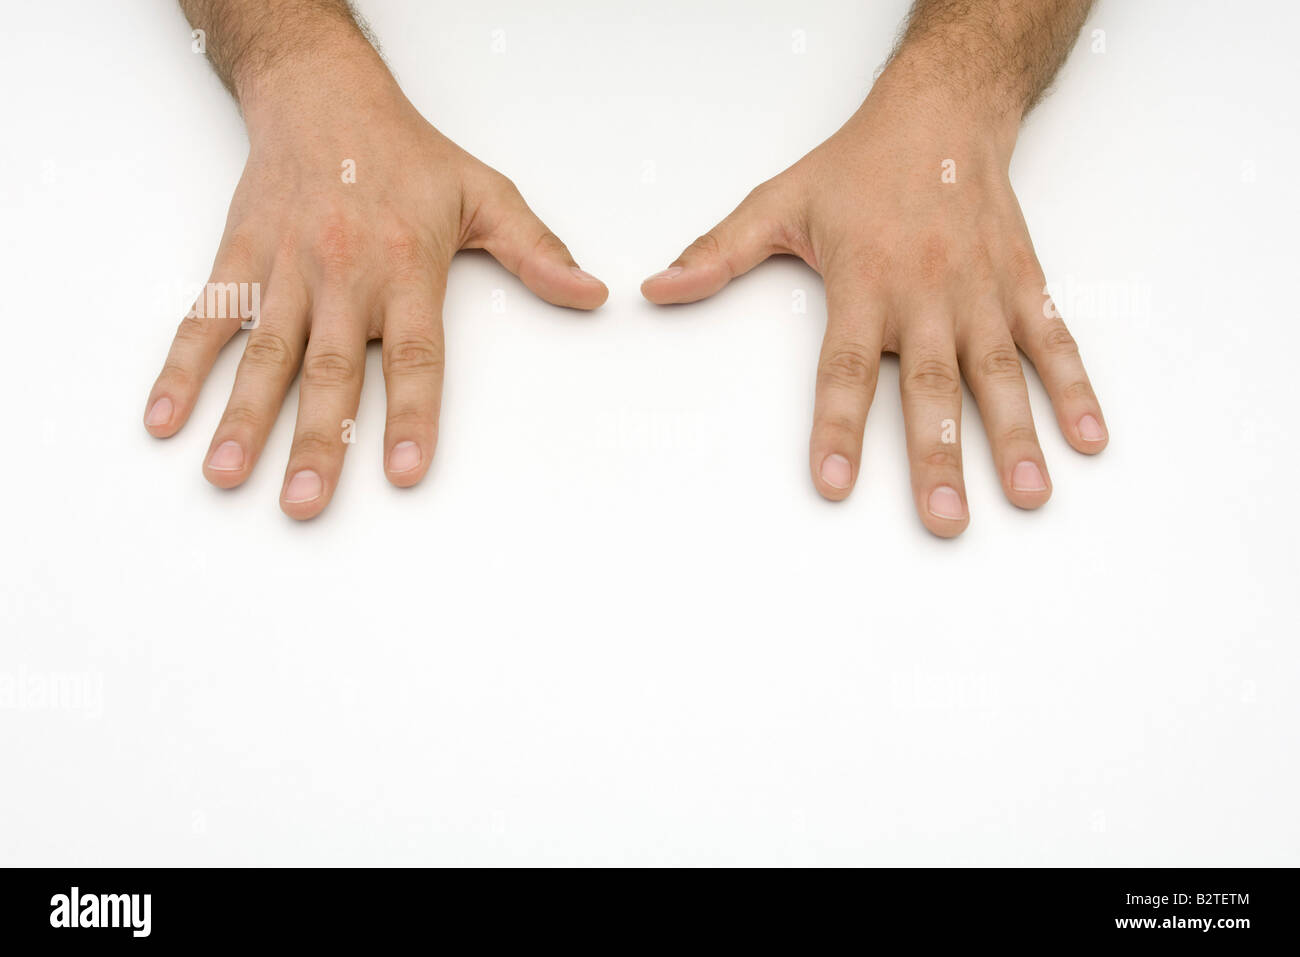 Man's hands, side by side Stock Photo